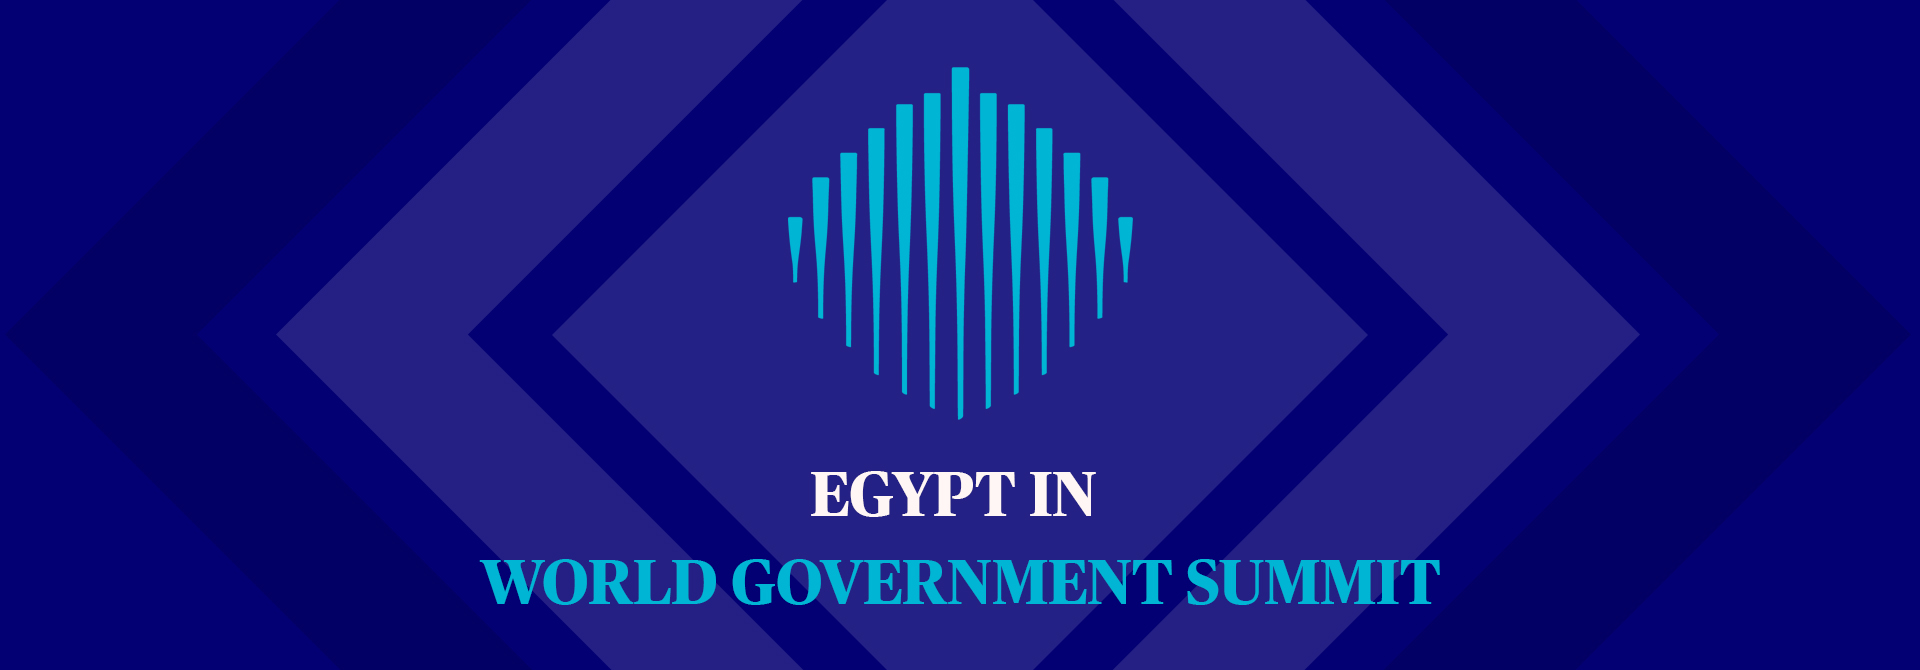 EGYPT IN WORLD GOVERNMENT SUMMIT